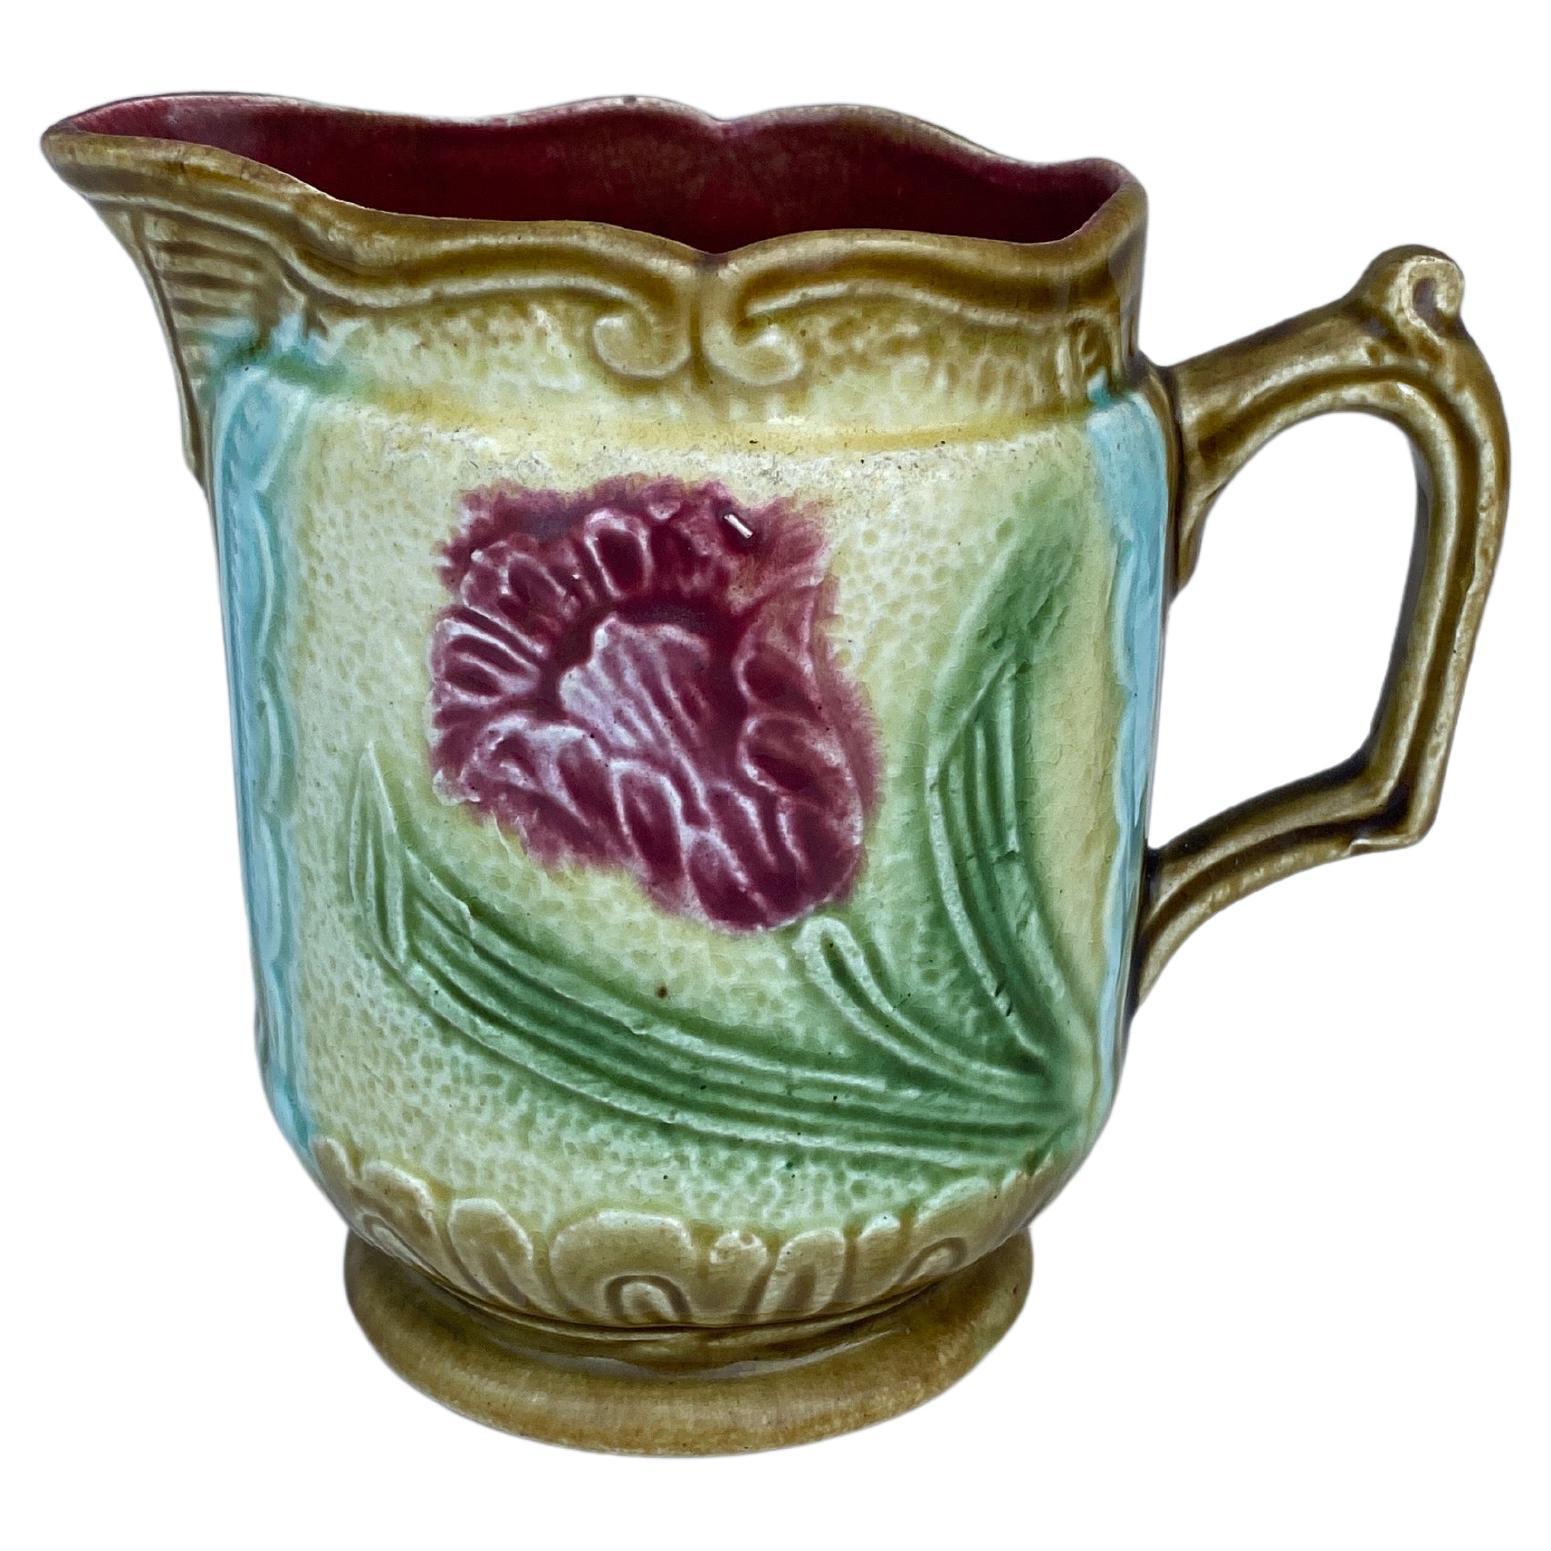 Small French Majolica Pitcher Creamer decorated with pink flowers circa 1900.